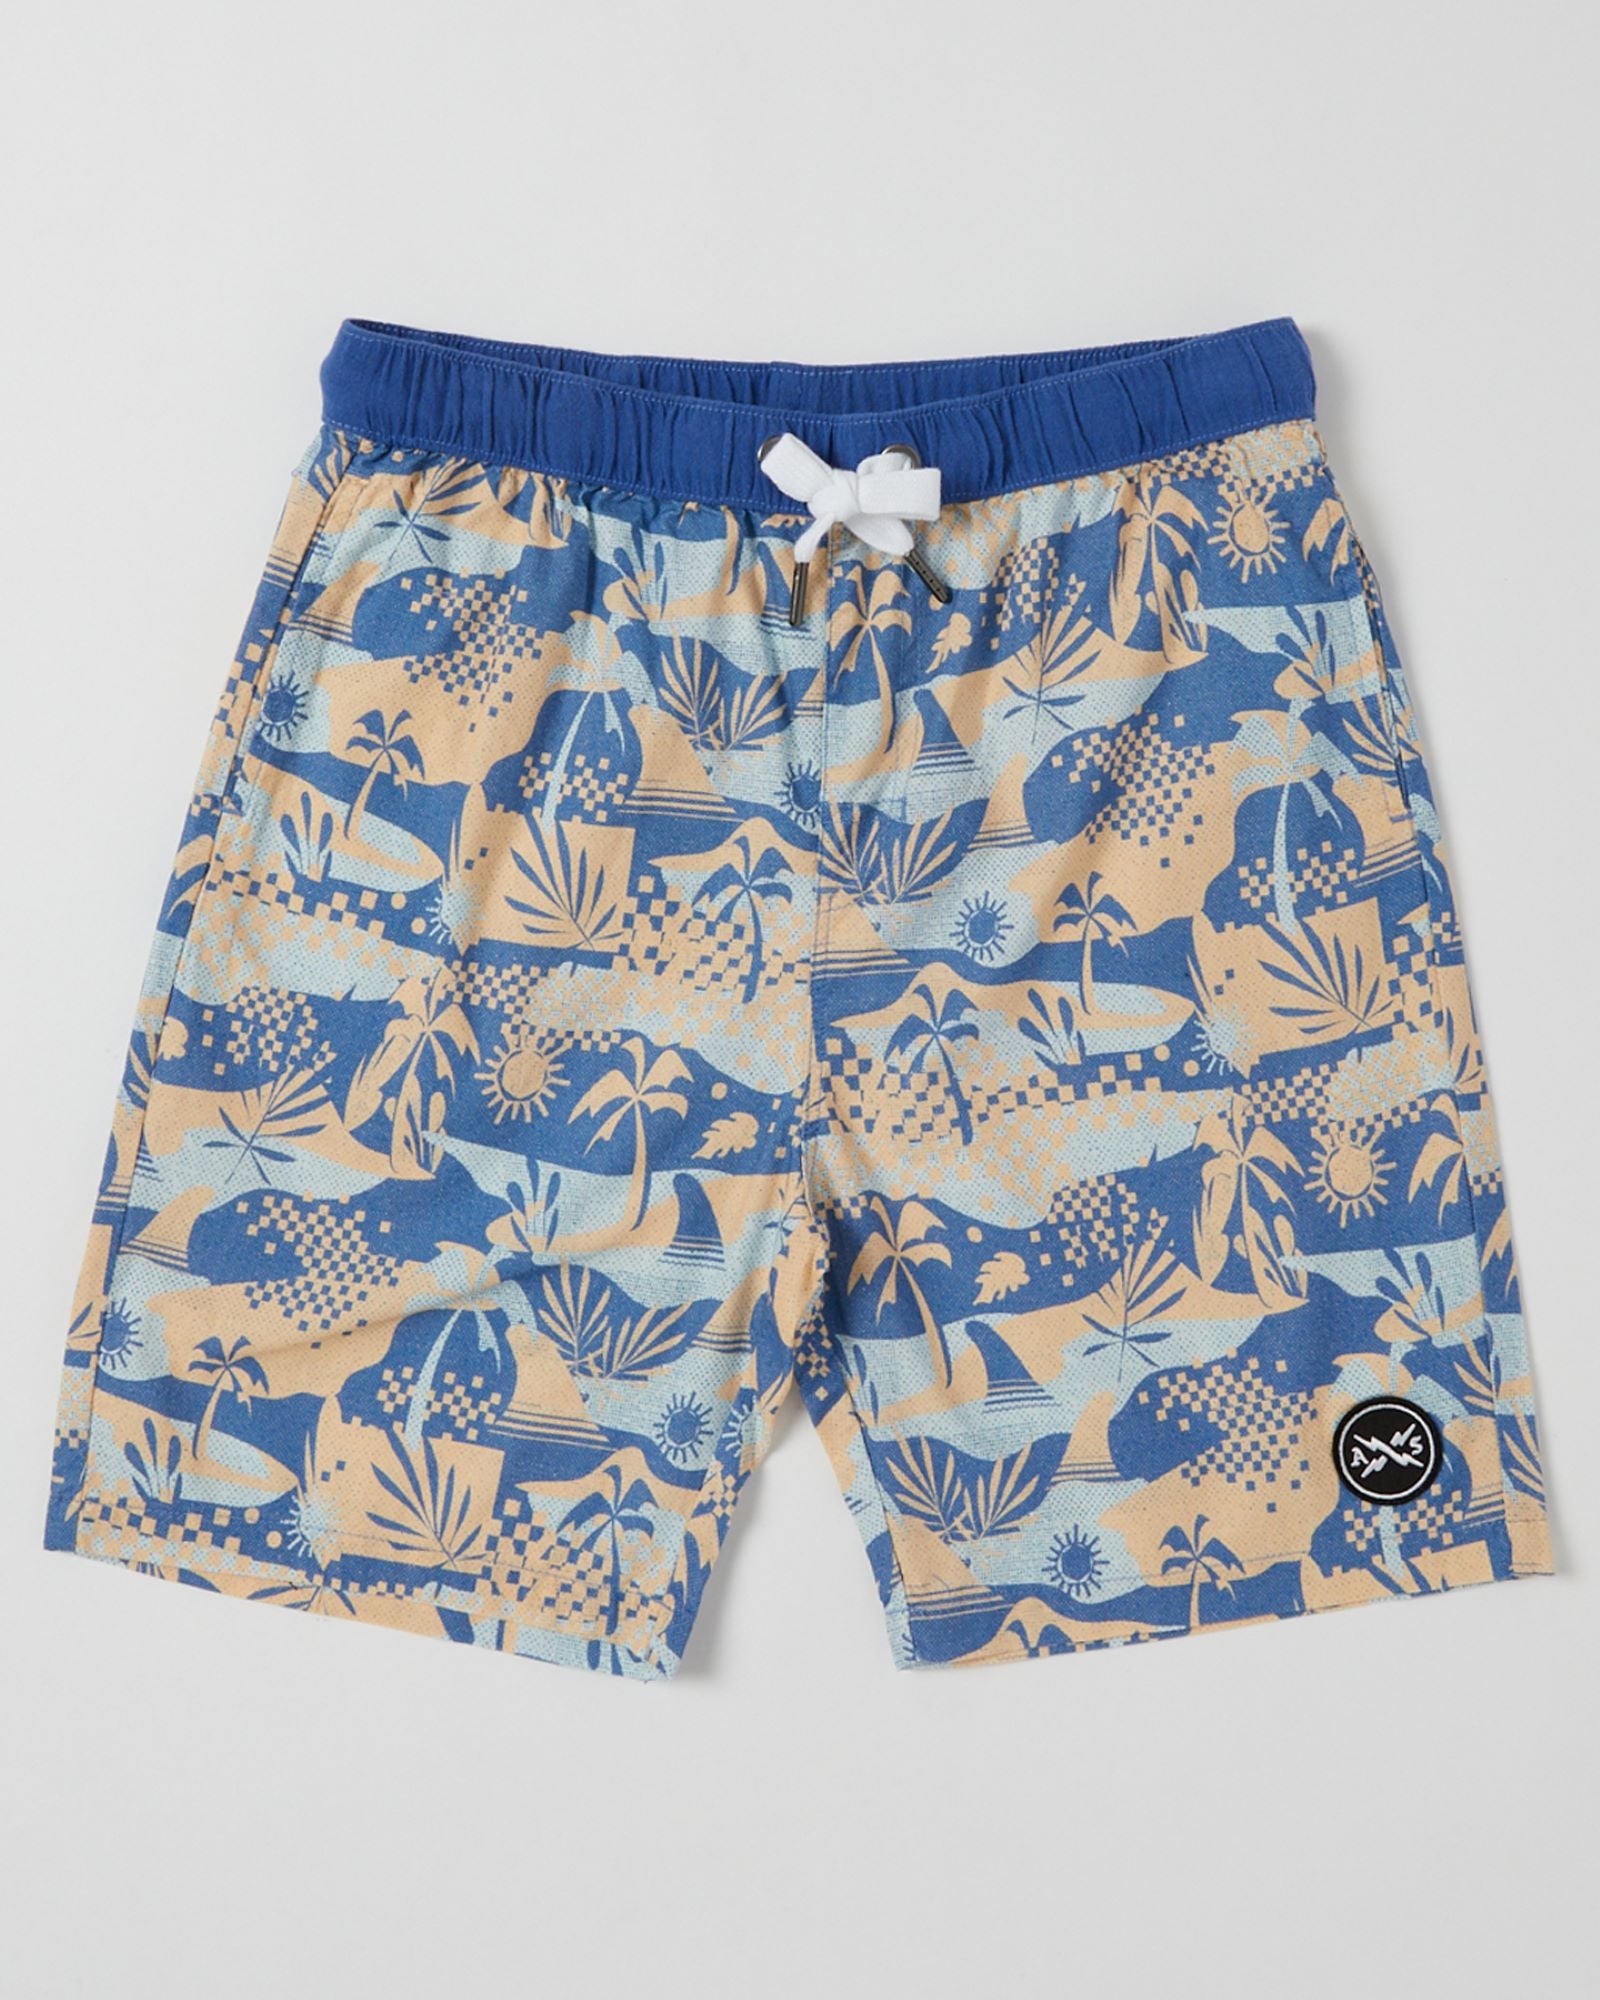 Alphabet Soup Teen Poolside Shorts designed for boys aged 8 to 16 offer a comfortable regular fit made of 100% cotton, featuring an adjustable draw cord, elastic waist, faux fly, and twin pockets. The vintage wash provides a stylish tropical print in three exciting colors.